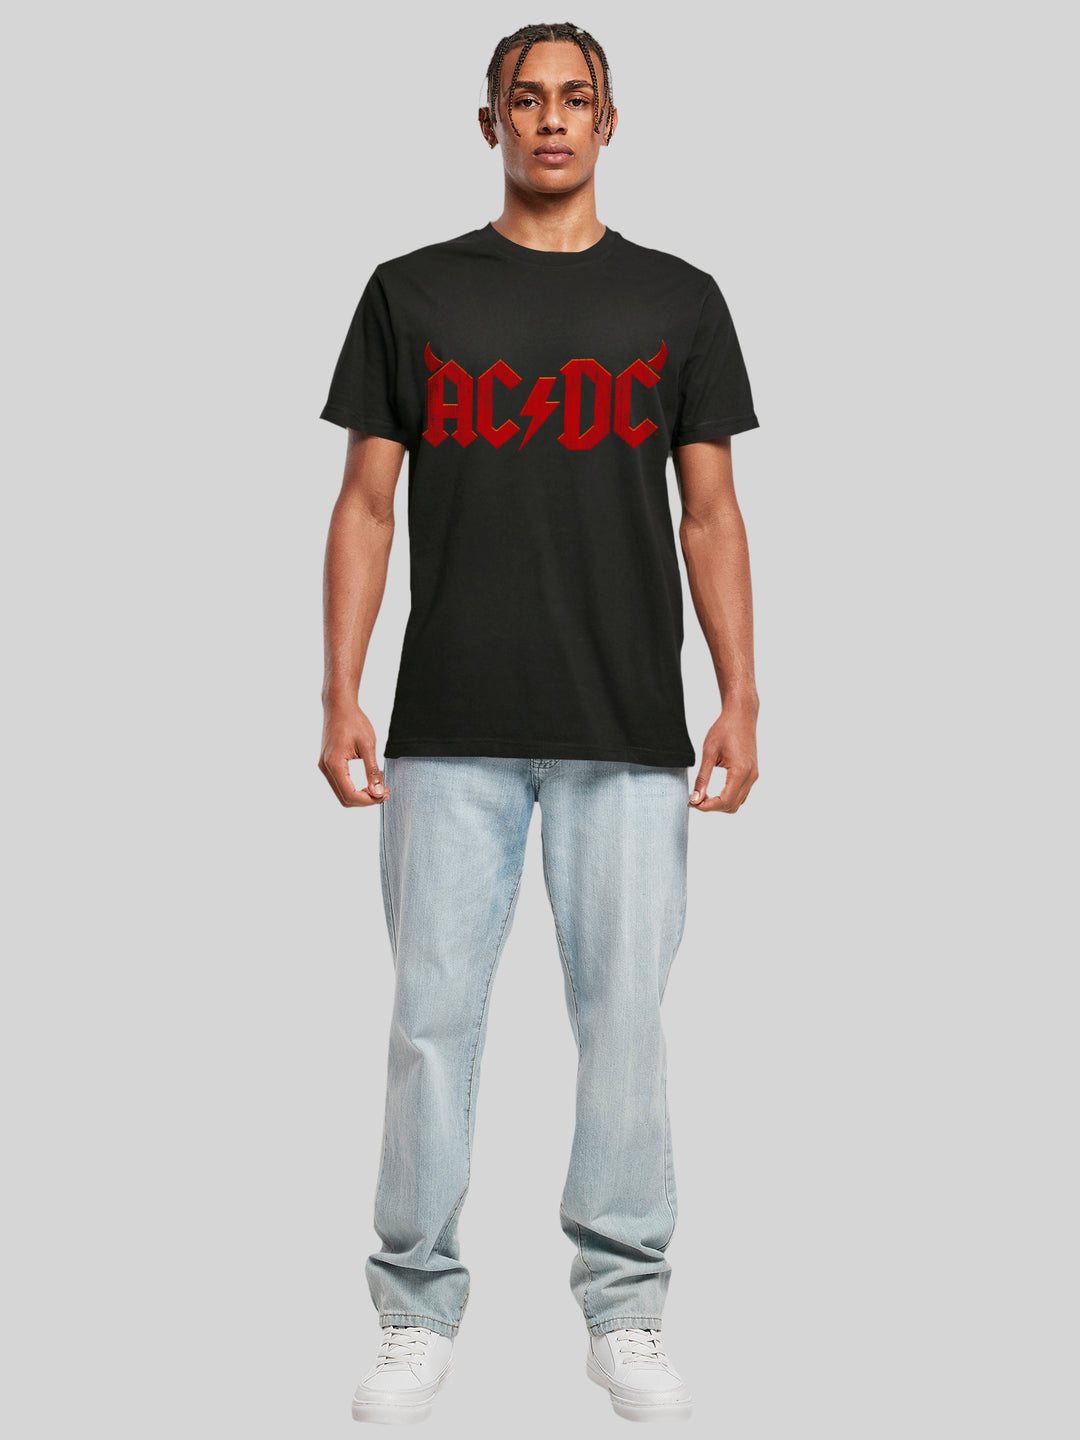 ACDC Horns Logo with T-Shirt Round Neck